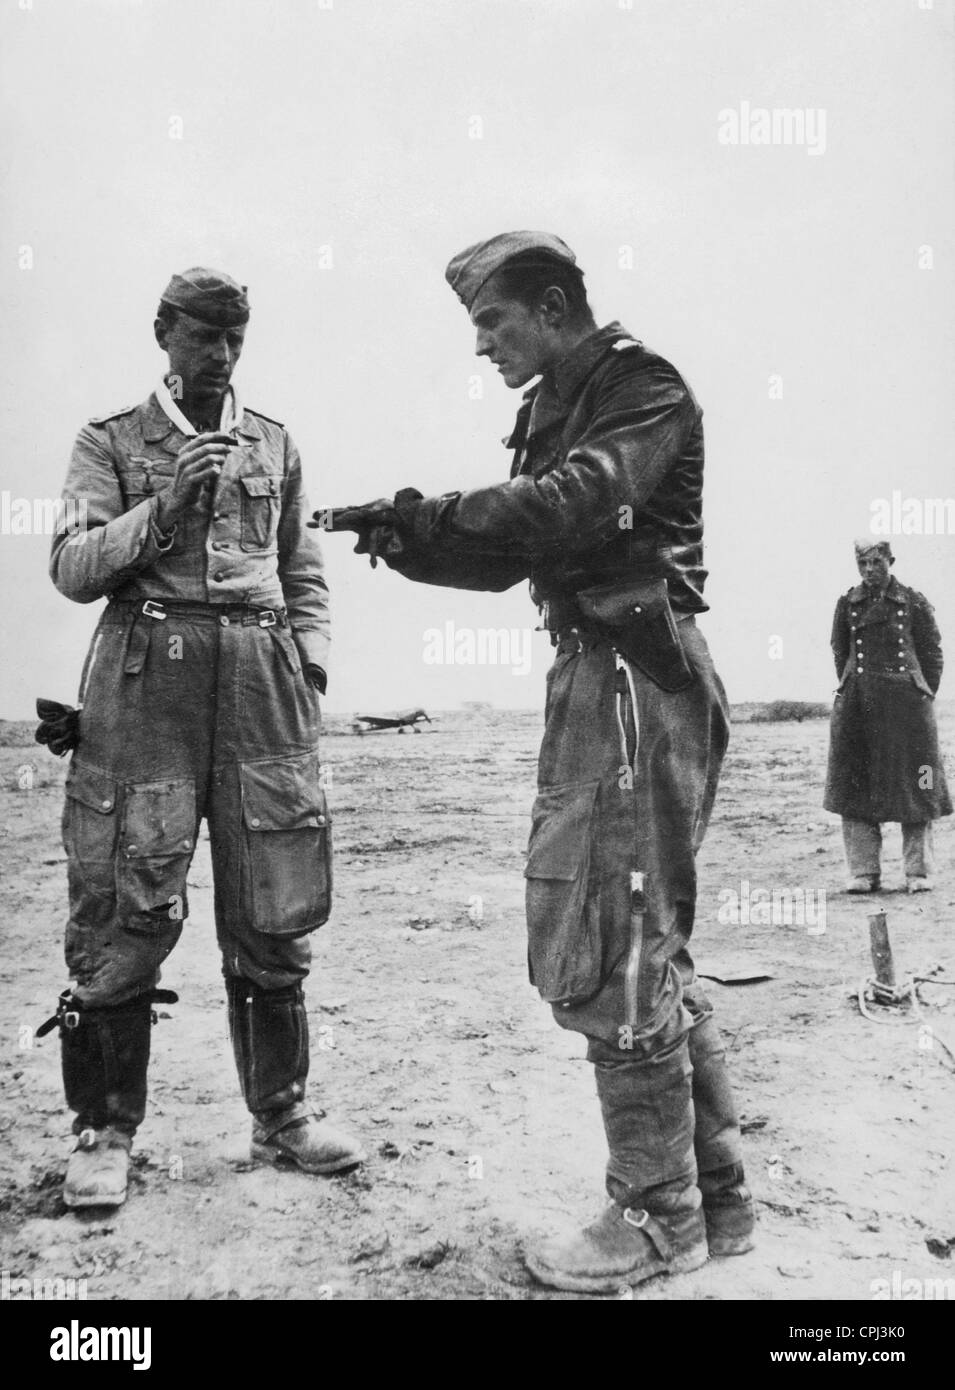 Fighter pilot Hans-Joachim Marseille (right) talks to an unknow person about his air fight in North Africa. Stock Photo